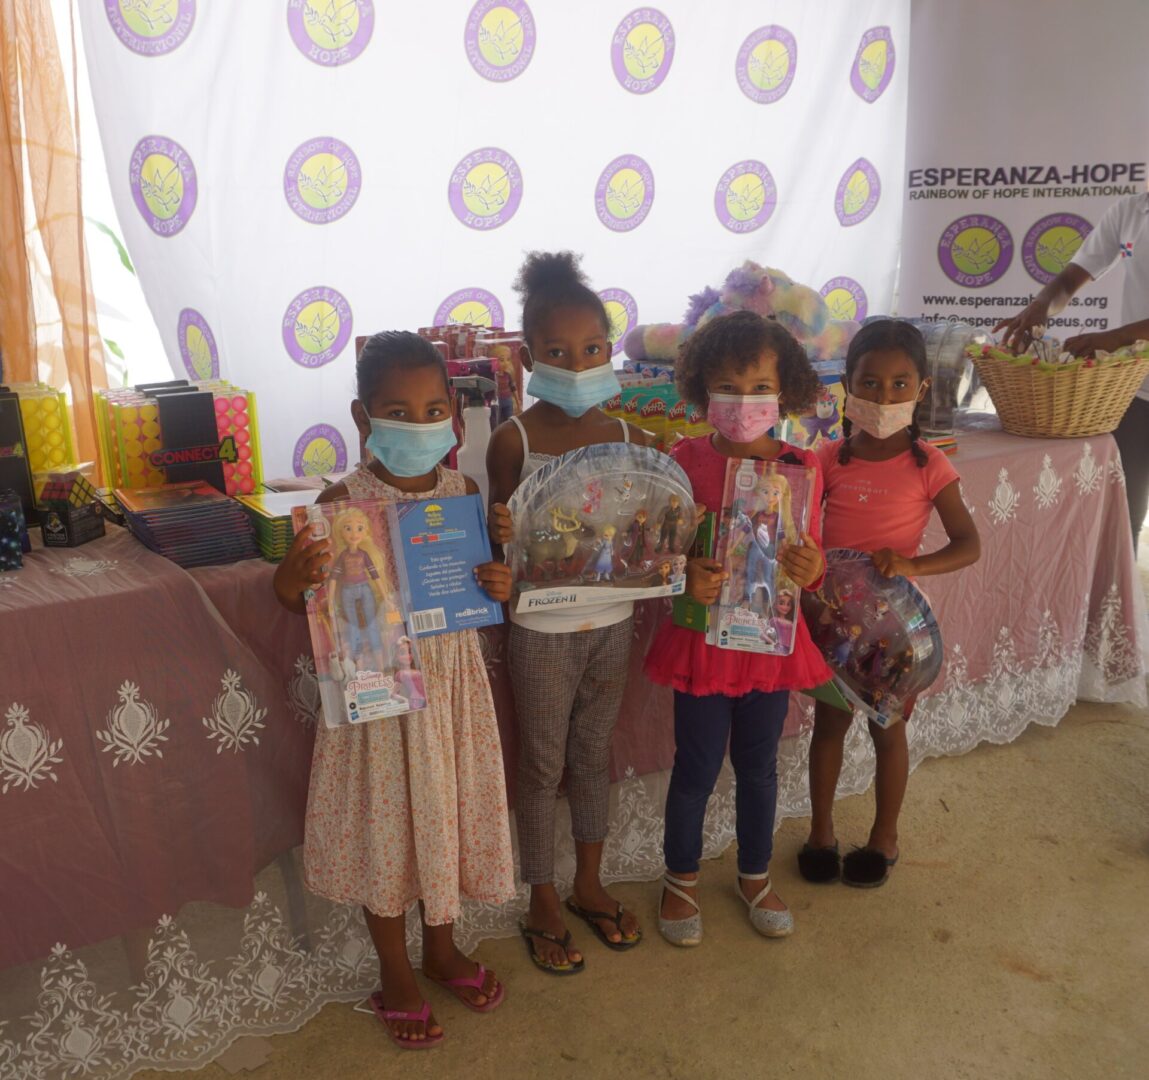 Four young girls wearing masks and holding books and toys, batch 3